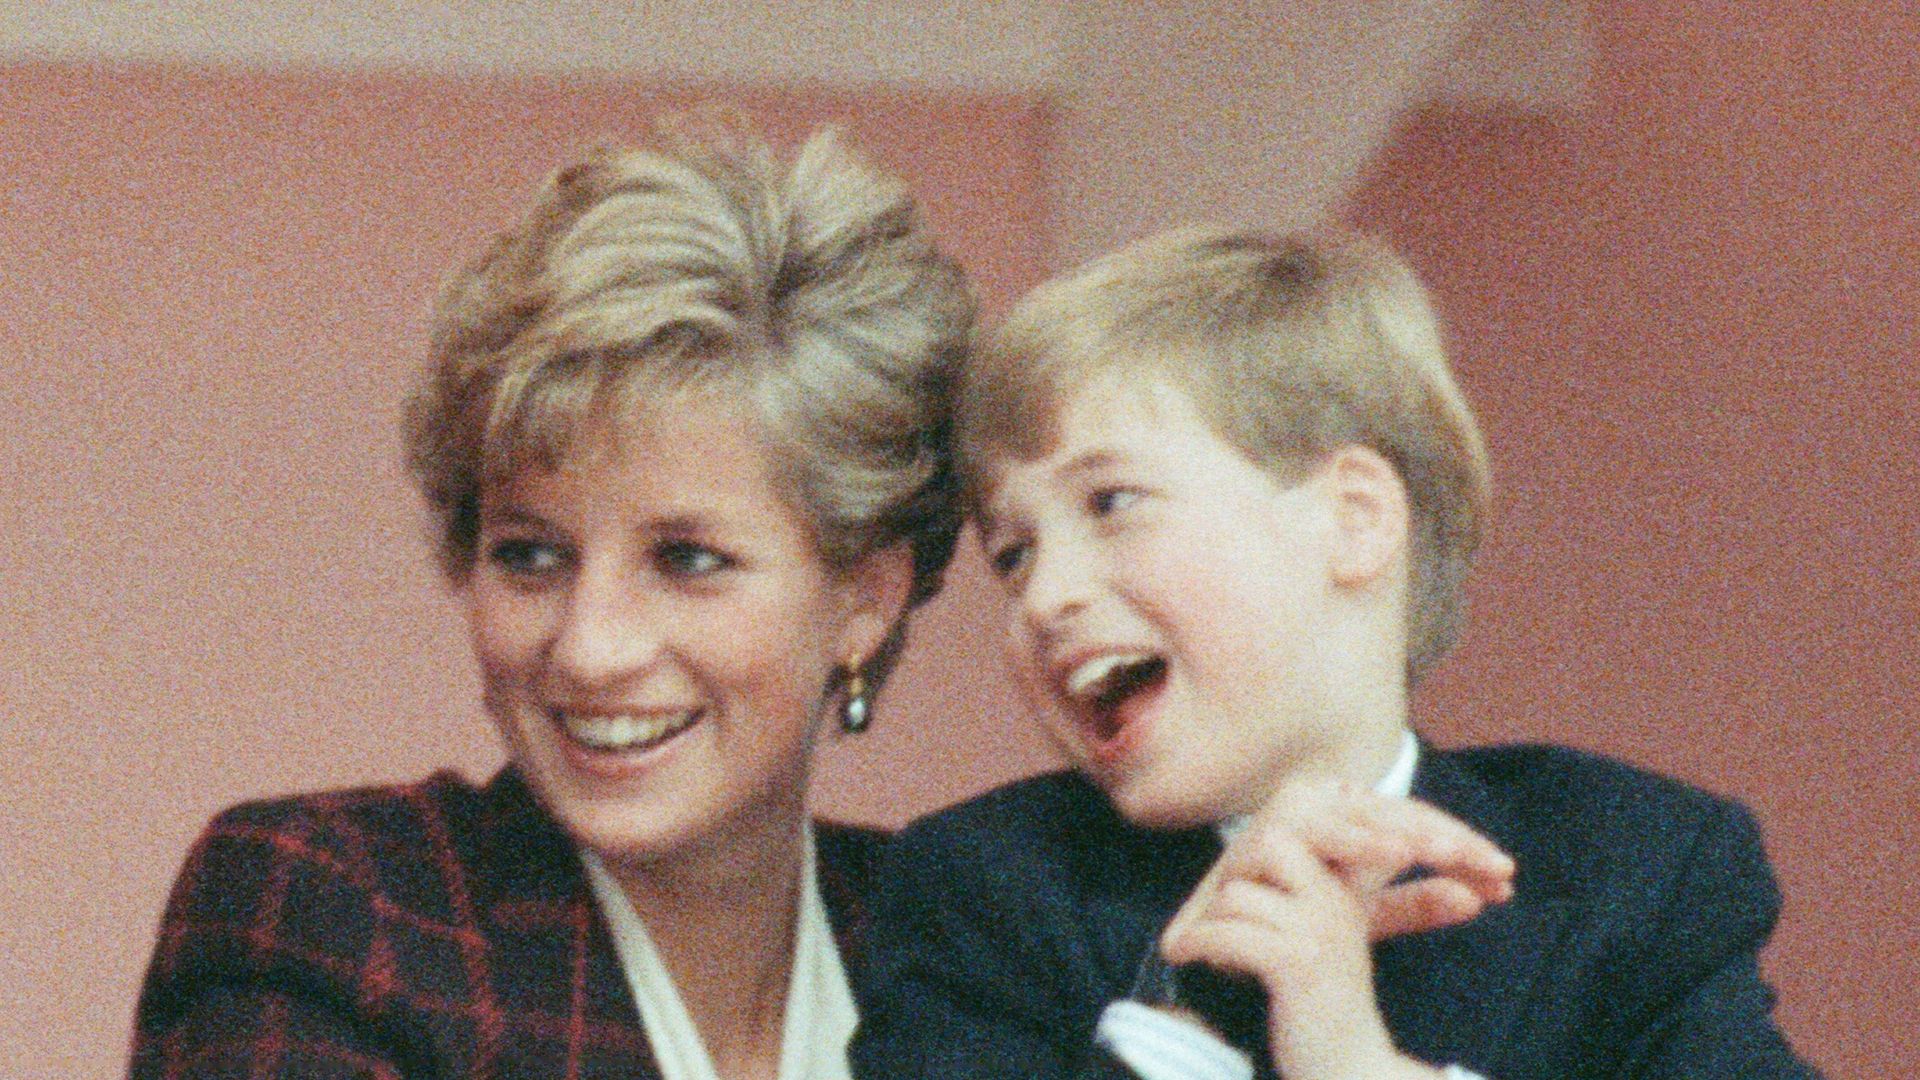  Princess Diana with her son Prince William at The International Horse Show in Olympia, West London. 